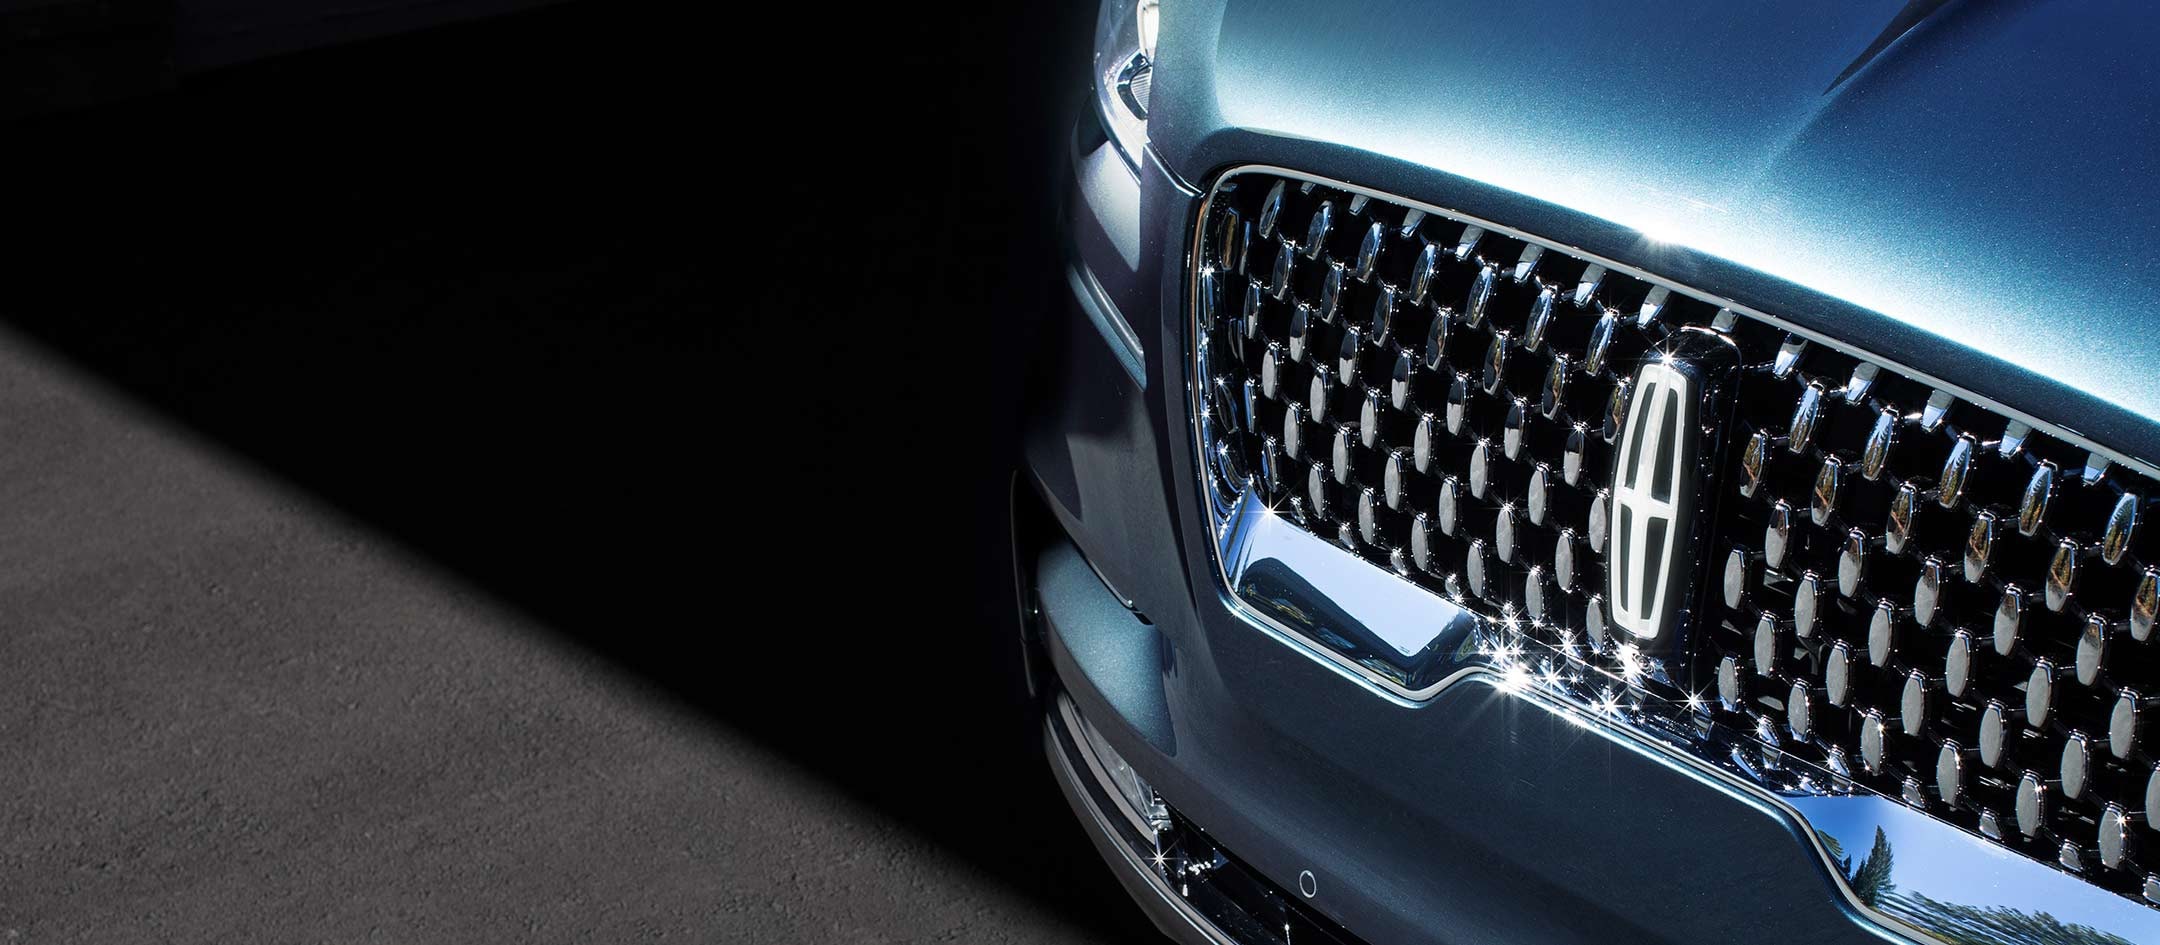 The Lincoln Black Label signature grille with available illuminated Lincoln Star shows off a striking front-end design